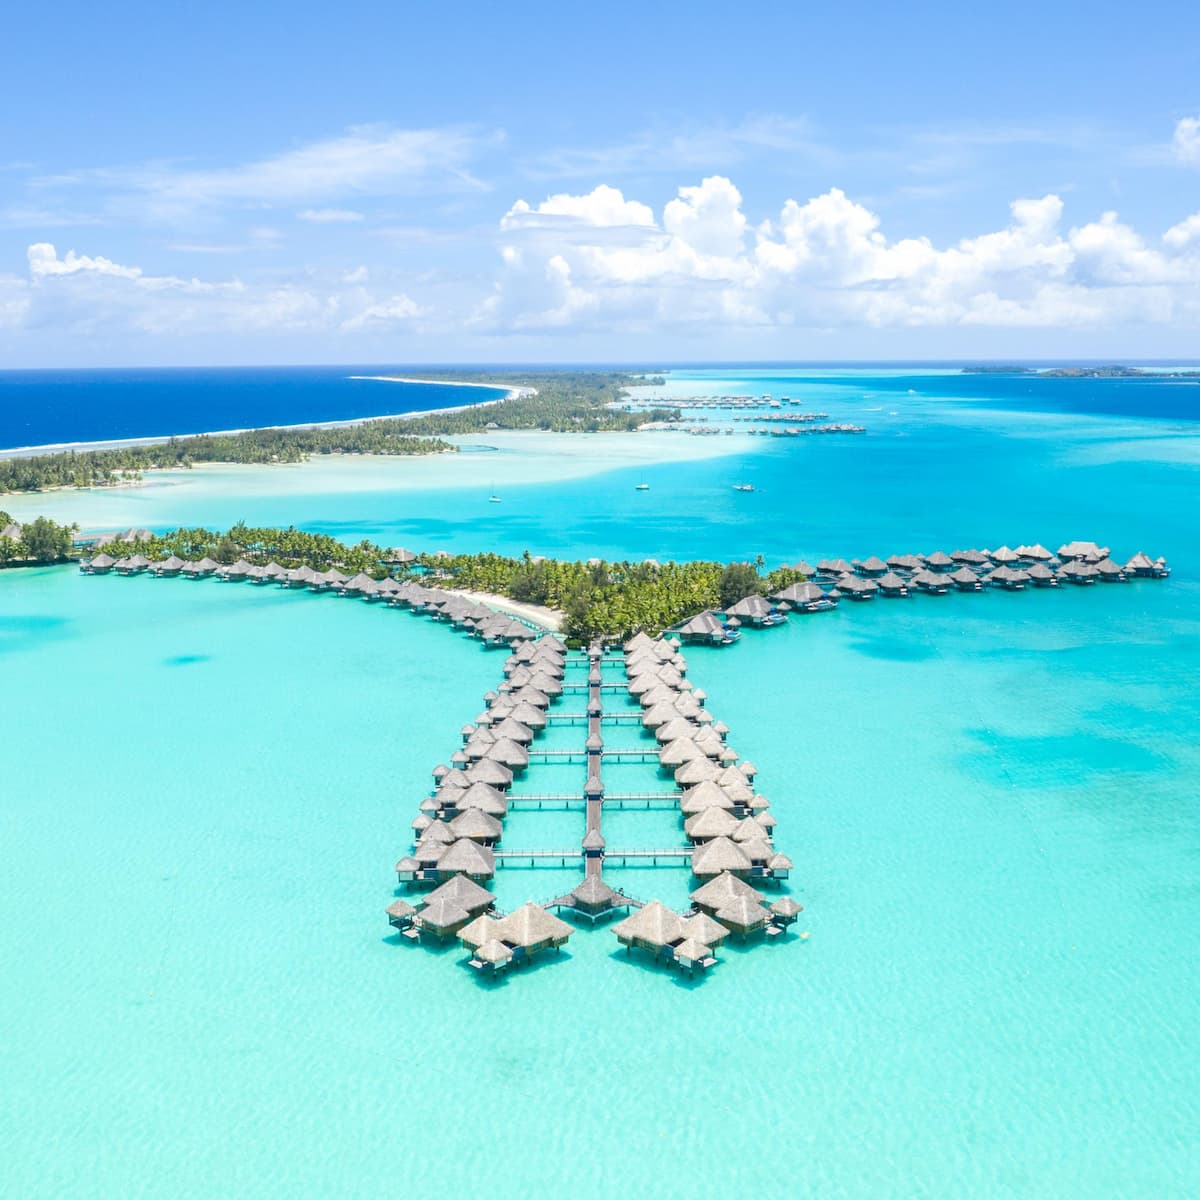 Overwater bungalows of The St. Regis Bora Bora Resort from overhead with crystal clear water in the lagoon and darker Pacific water outside.